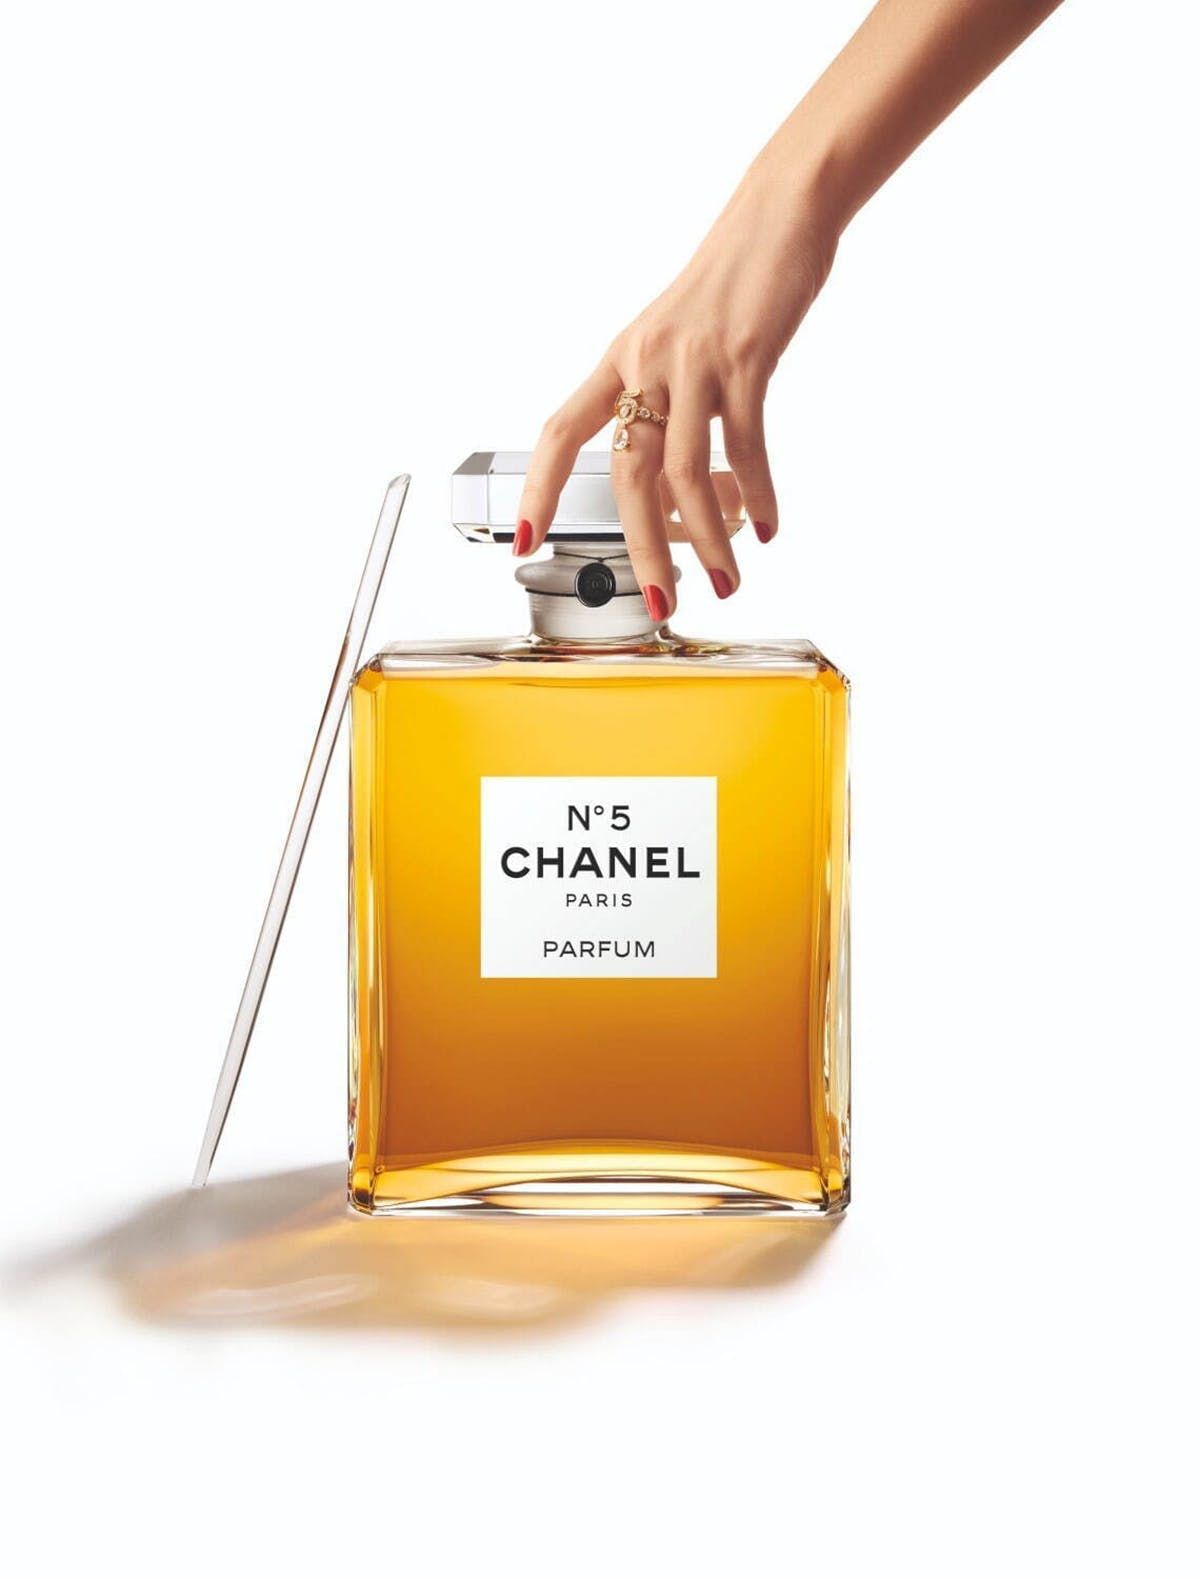 This is the Largest Chanel Perfume N°5 Bottle Ever Produced - Global  Fashion Report